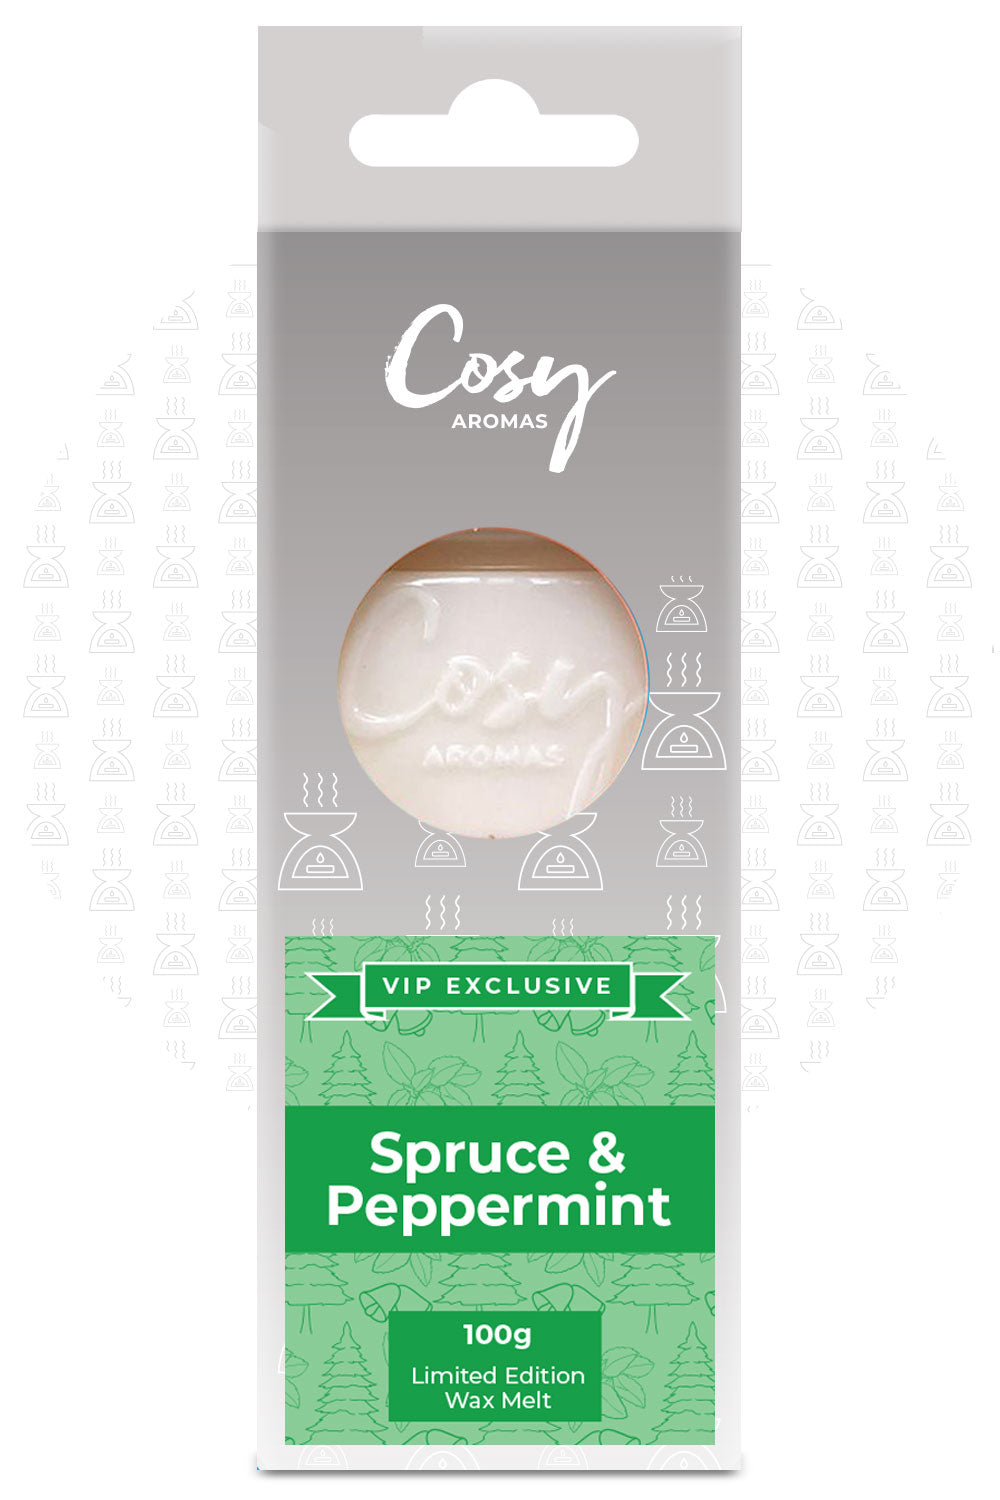 Spruce & Peppermint VIP Exclusive Wax Melt